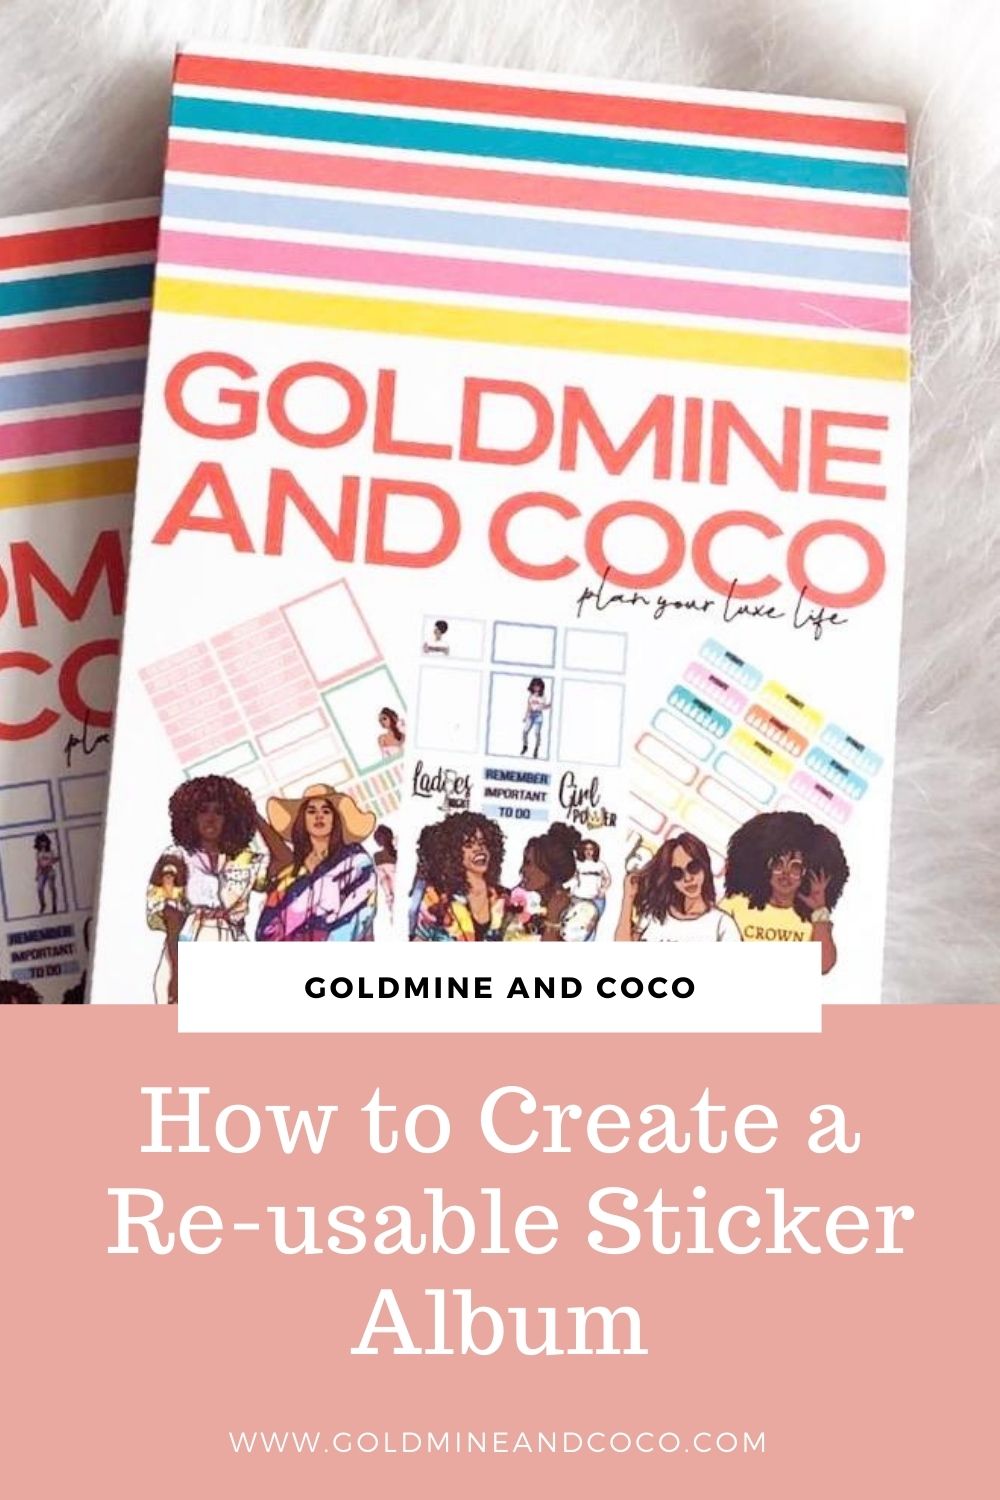 I got a reusable sticker book to store my glossier stickers